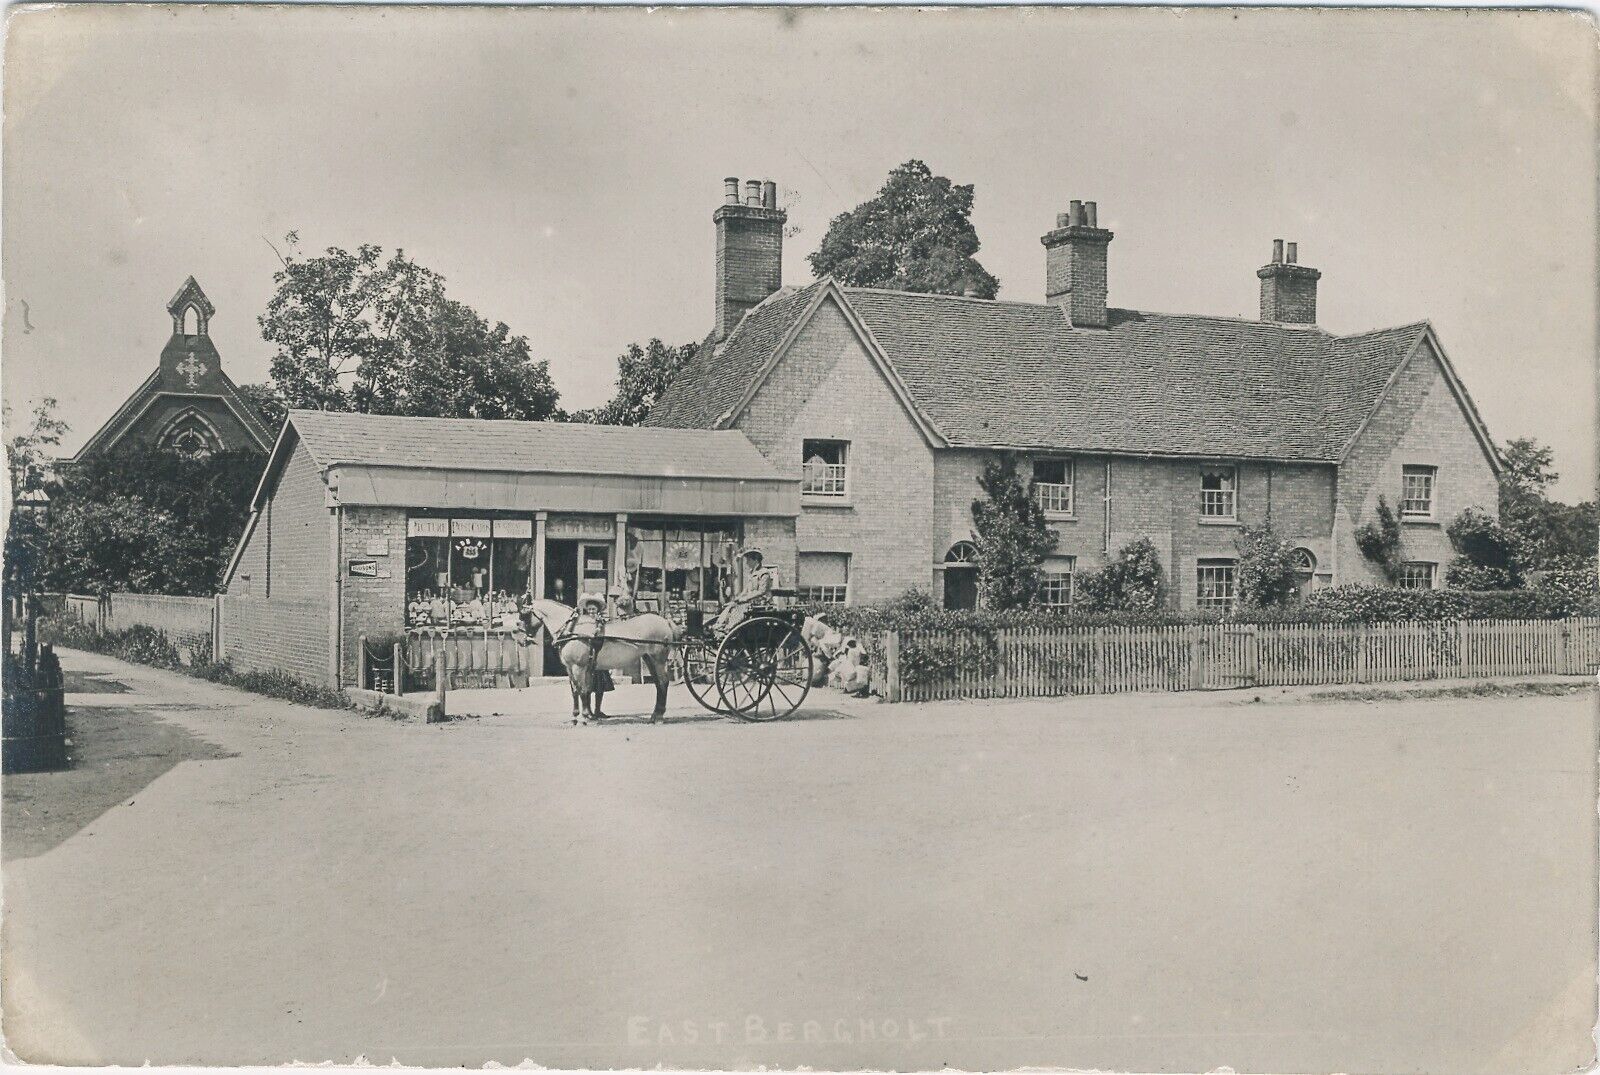 Undated Postcard showing the Store with Edward's name above the door<br>Author's collection